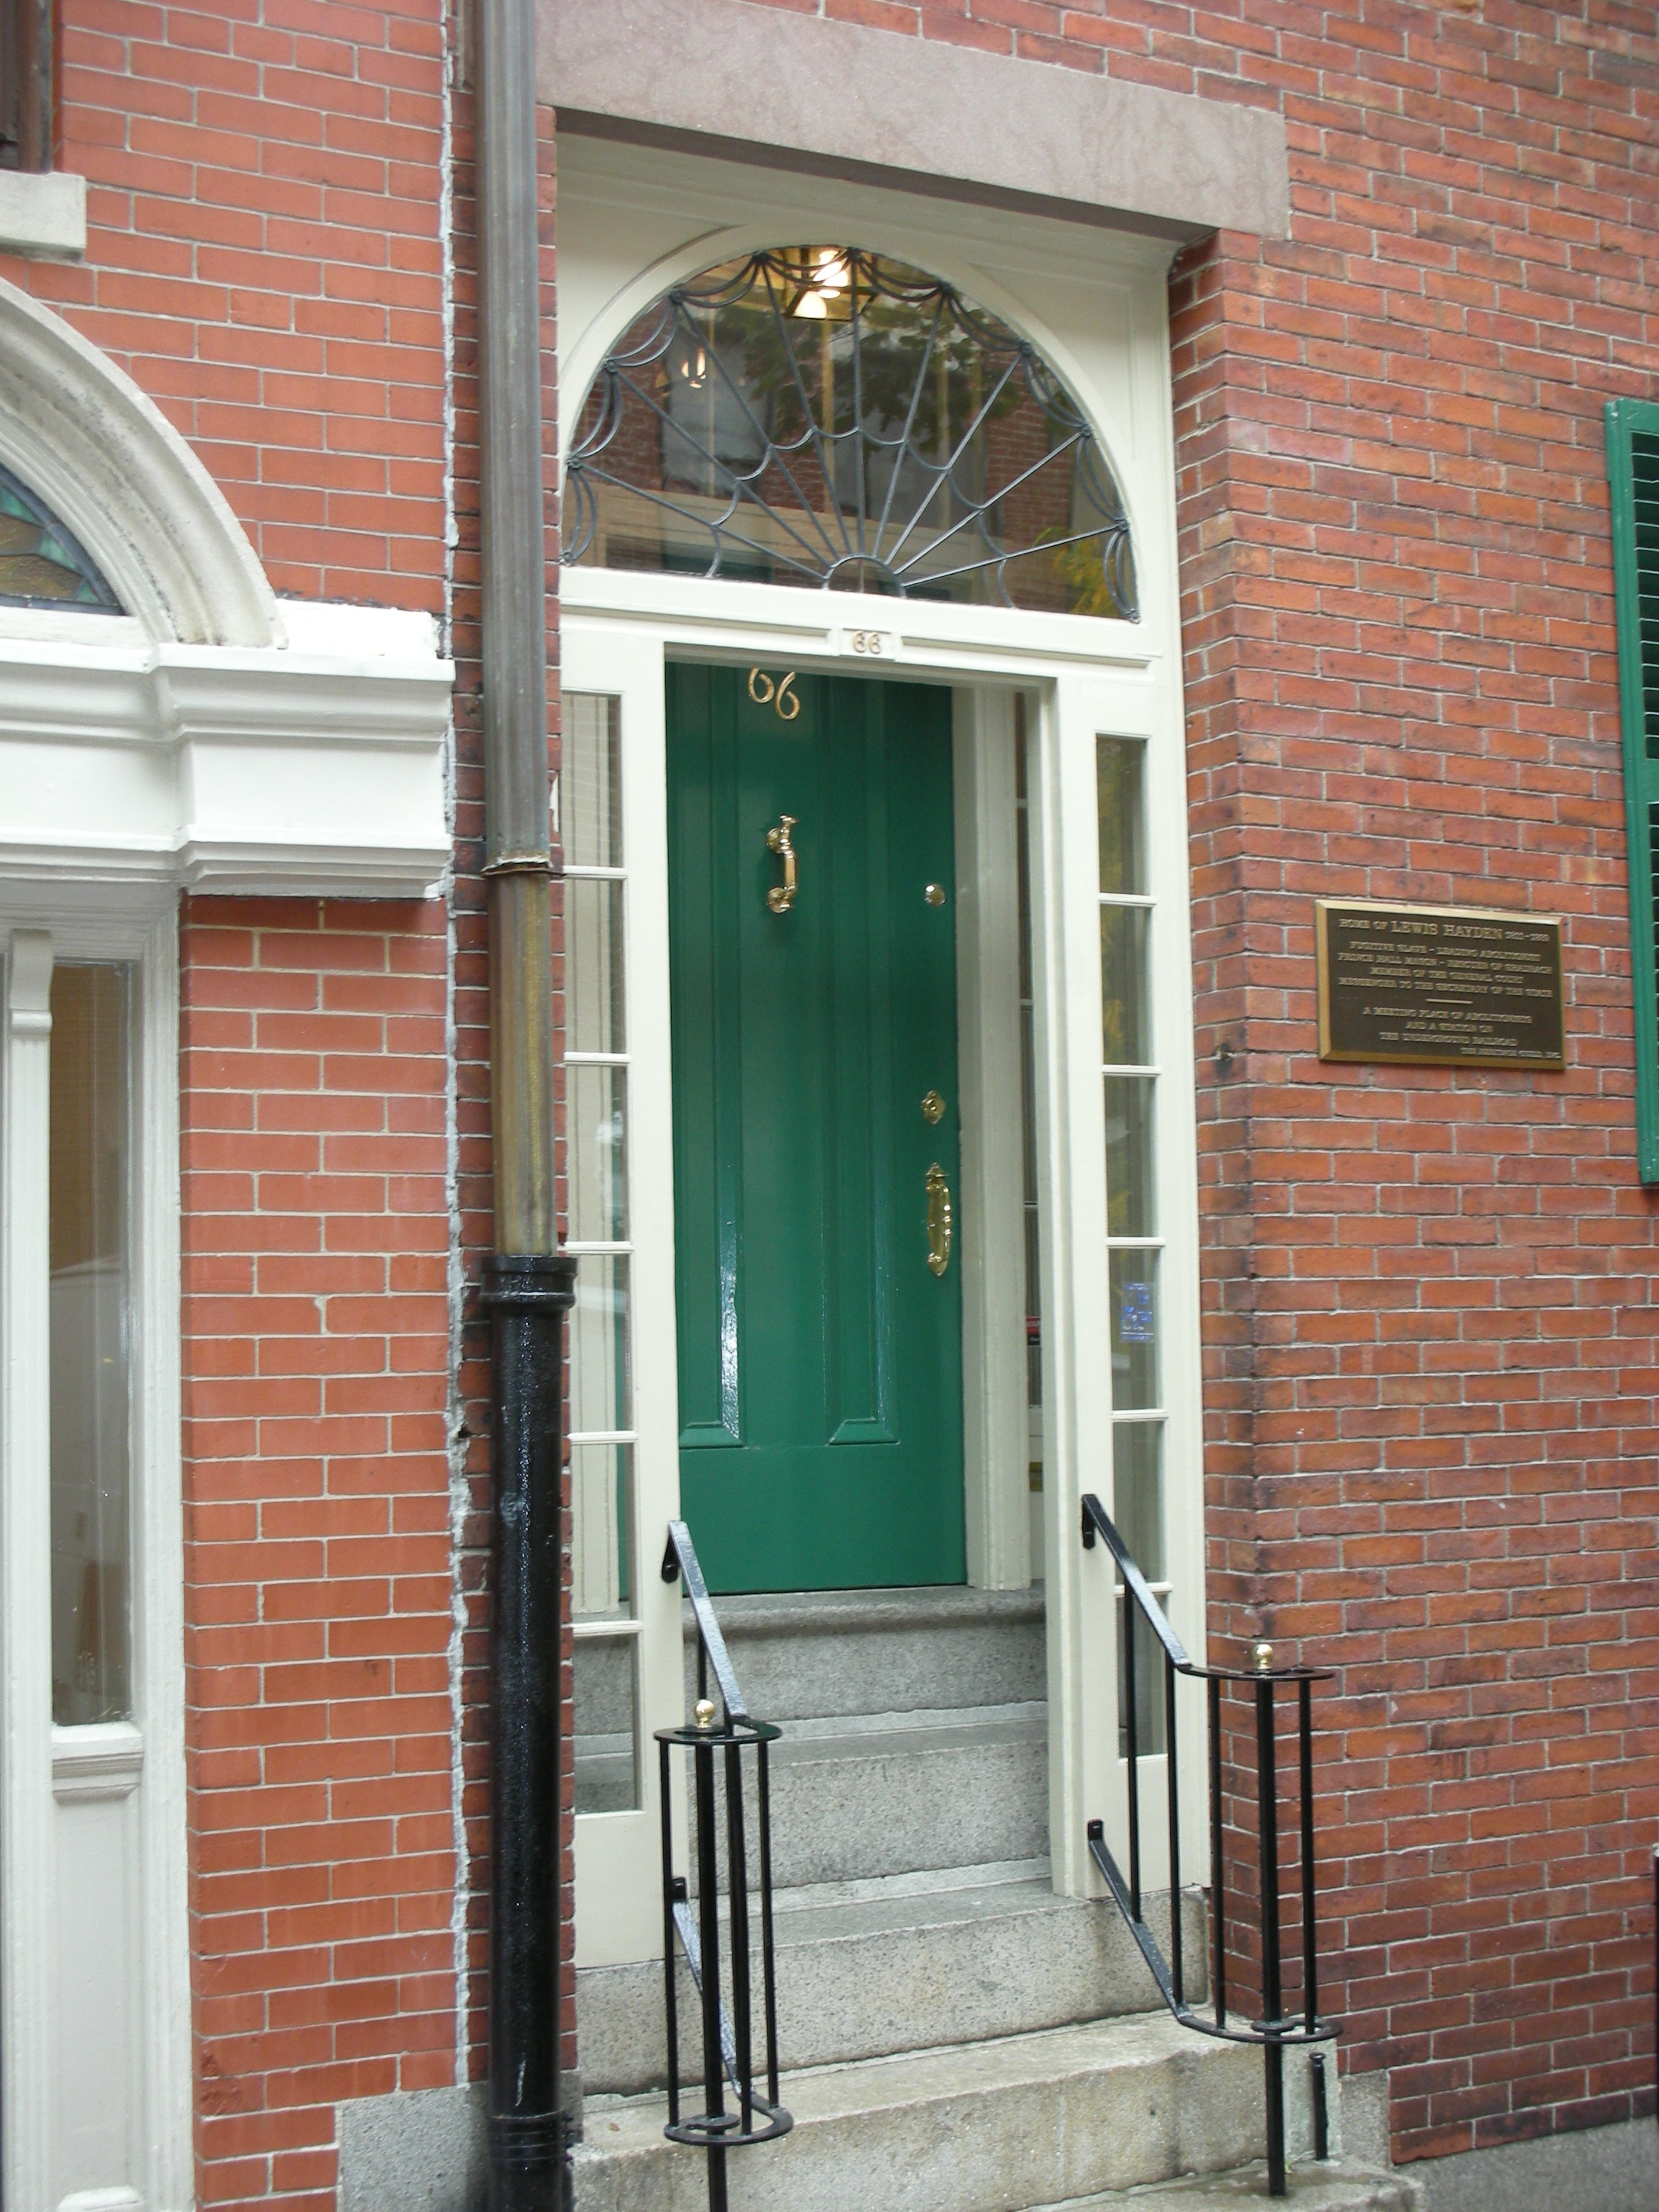 The entrance door into a red brick townhouse on Beacon Hill